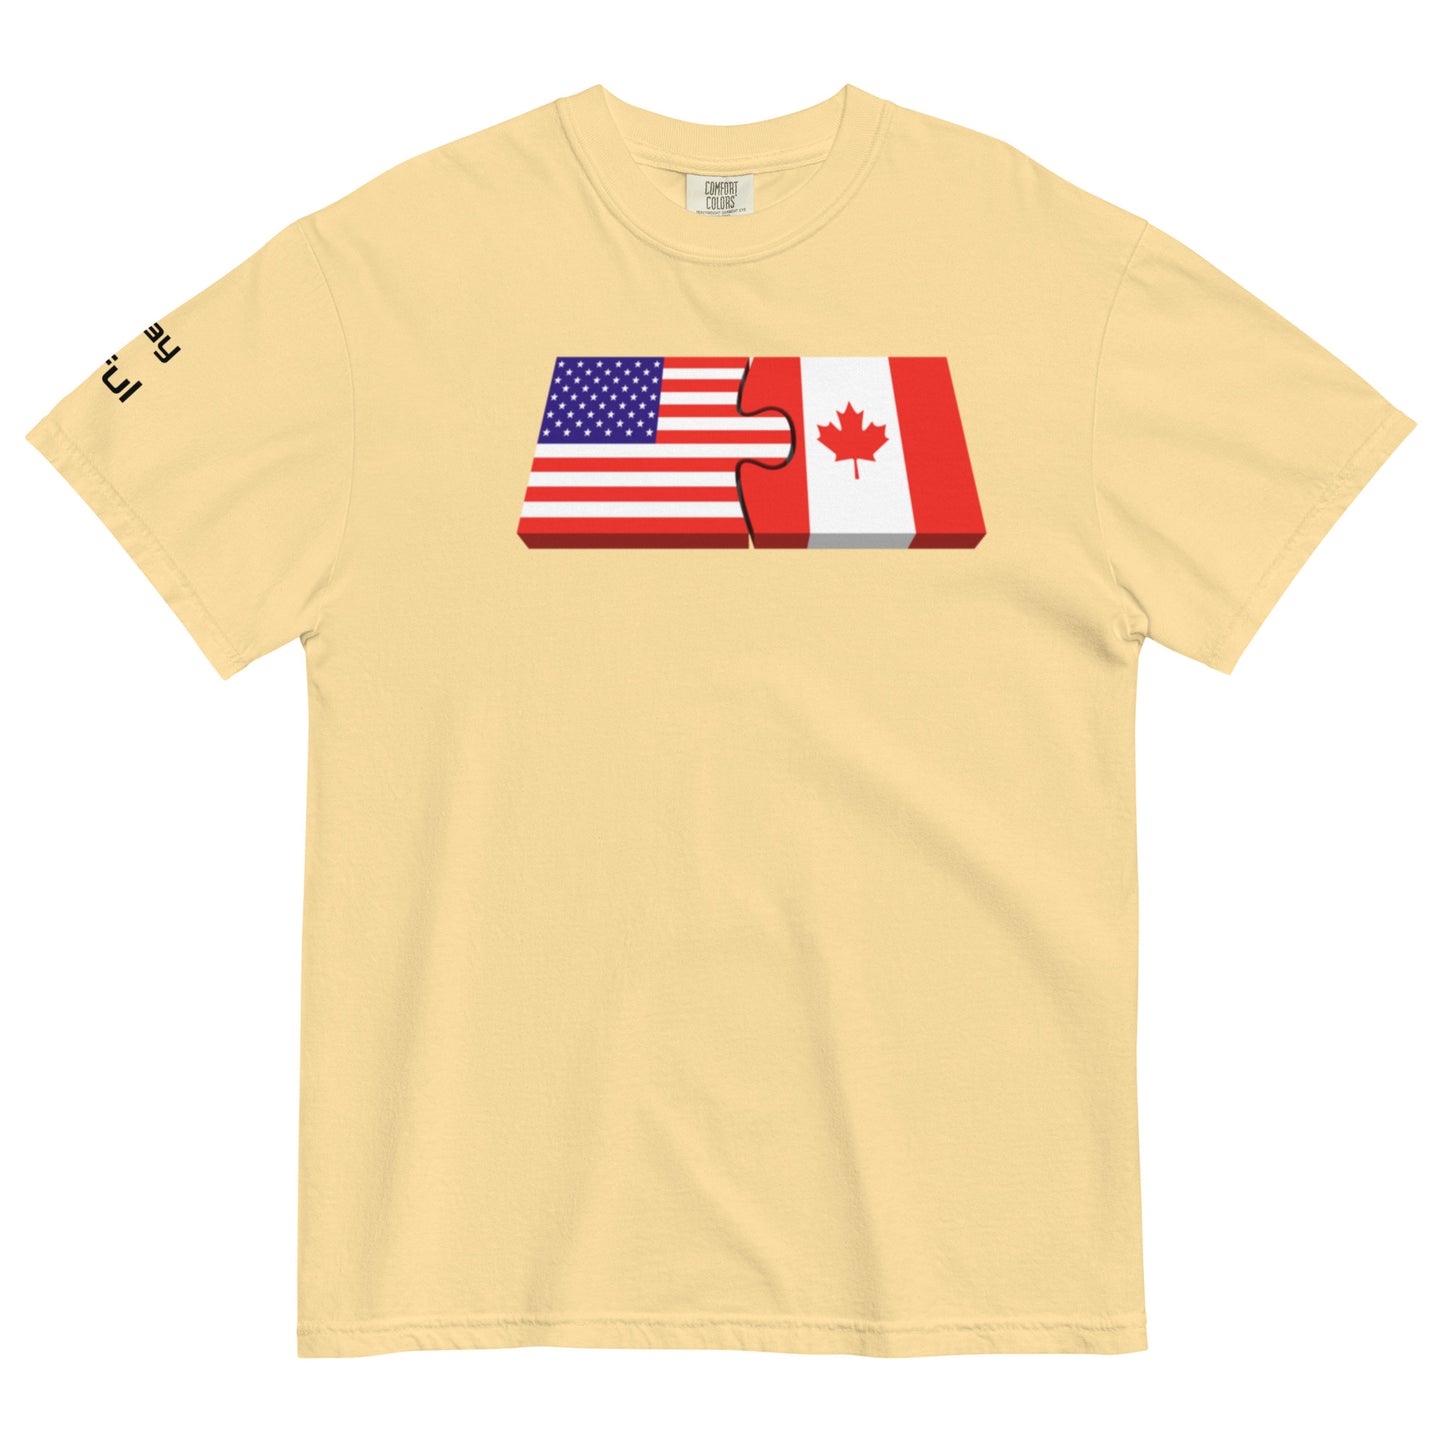 Unisex Red Cotton American/Canadian Flag Unison  garment-dyed heavyweight Peaceful t-shirt S-4XL